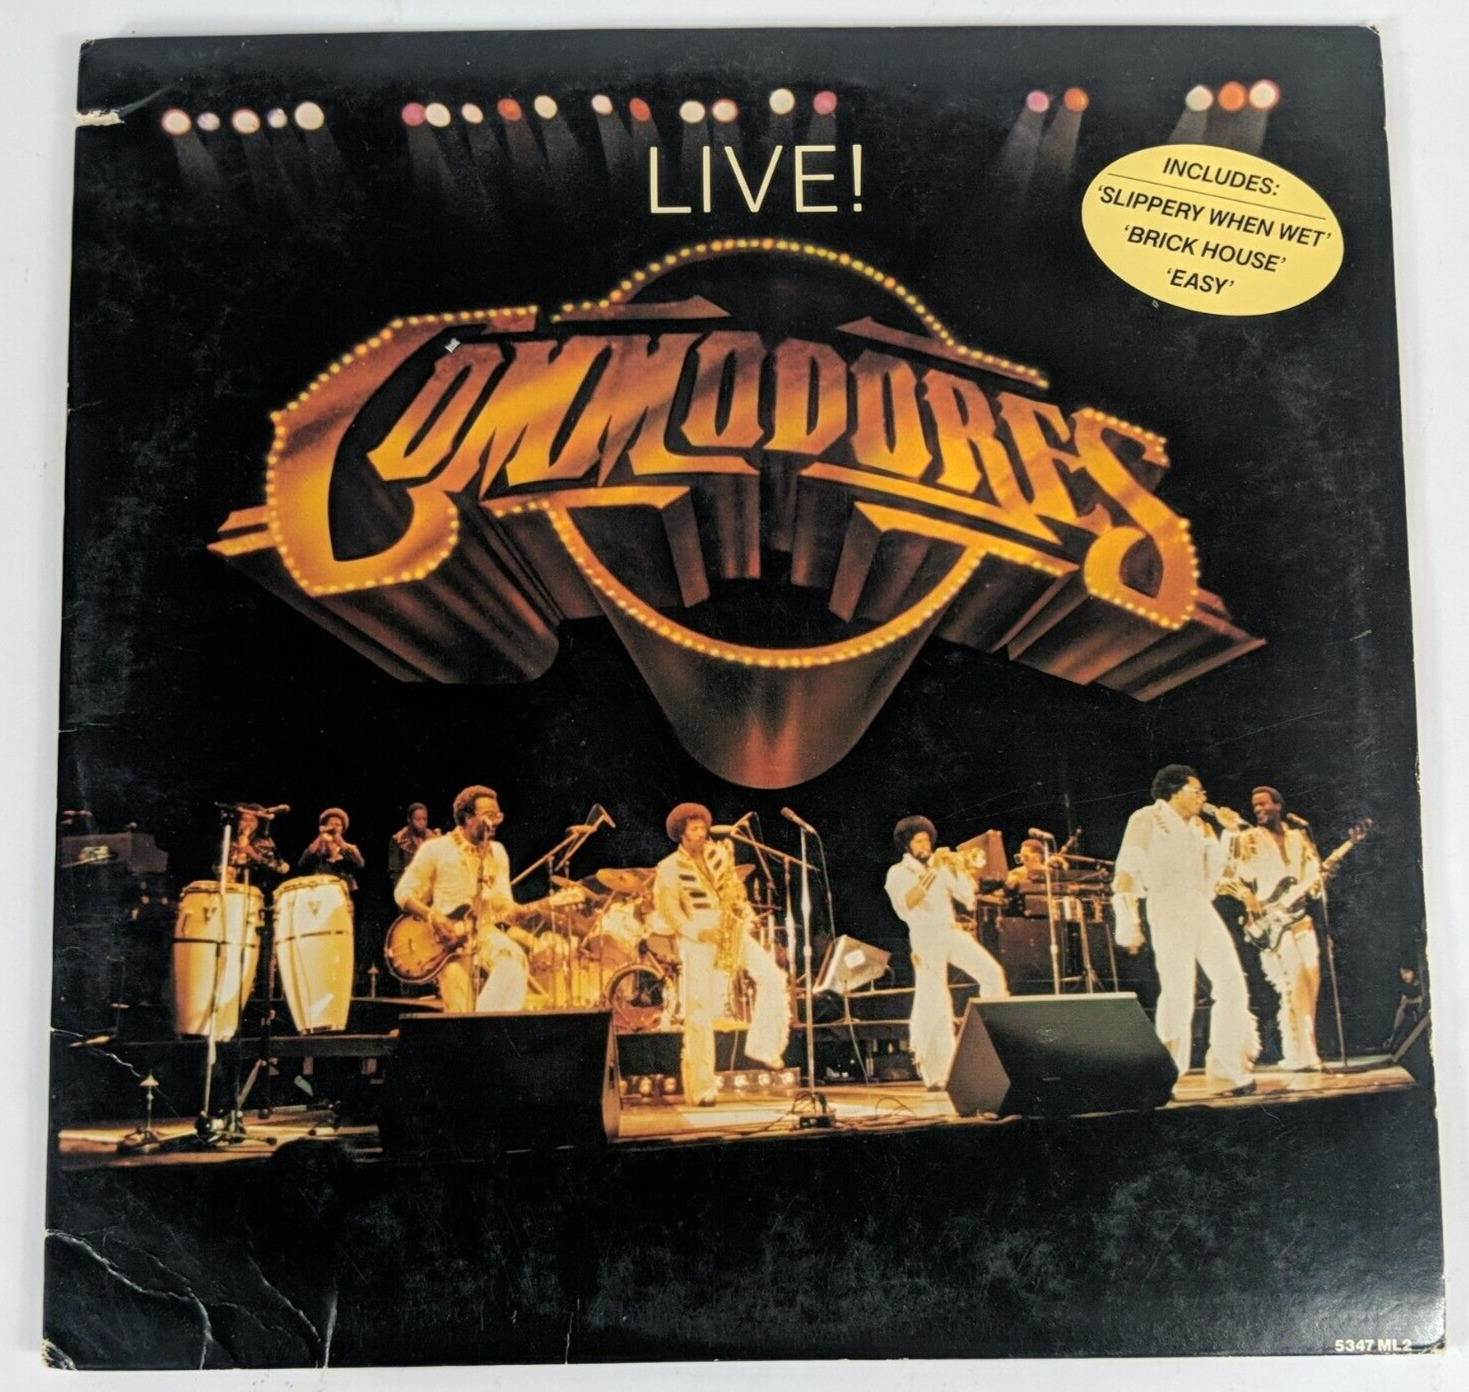 Vtg: 1977 Commodores Live Vinyl LP Record Motown Records, Side 2 & 3 Only